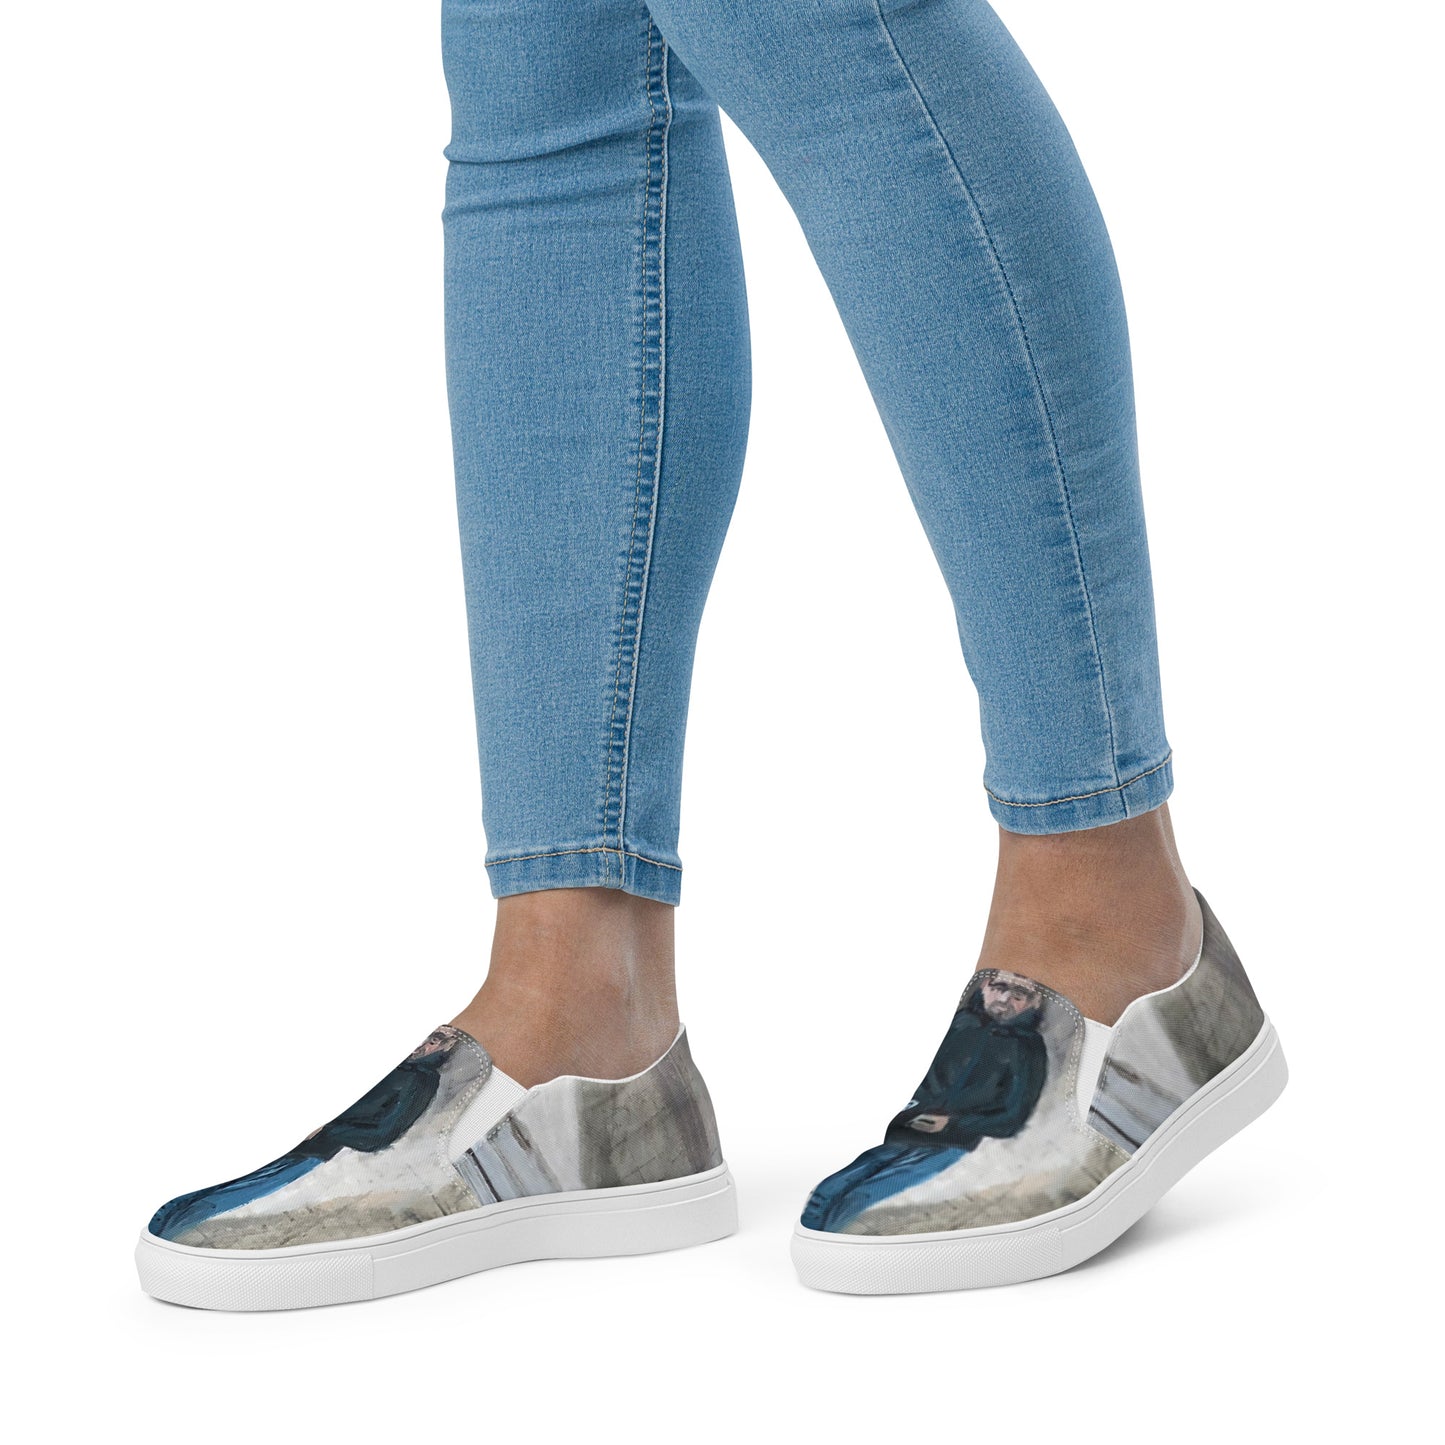 Head Down to the Chippy - Women’s slip-on canvas shoes